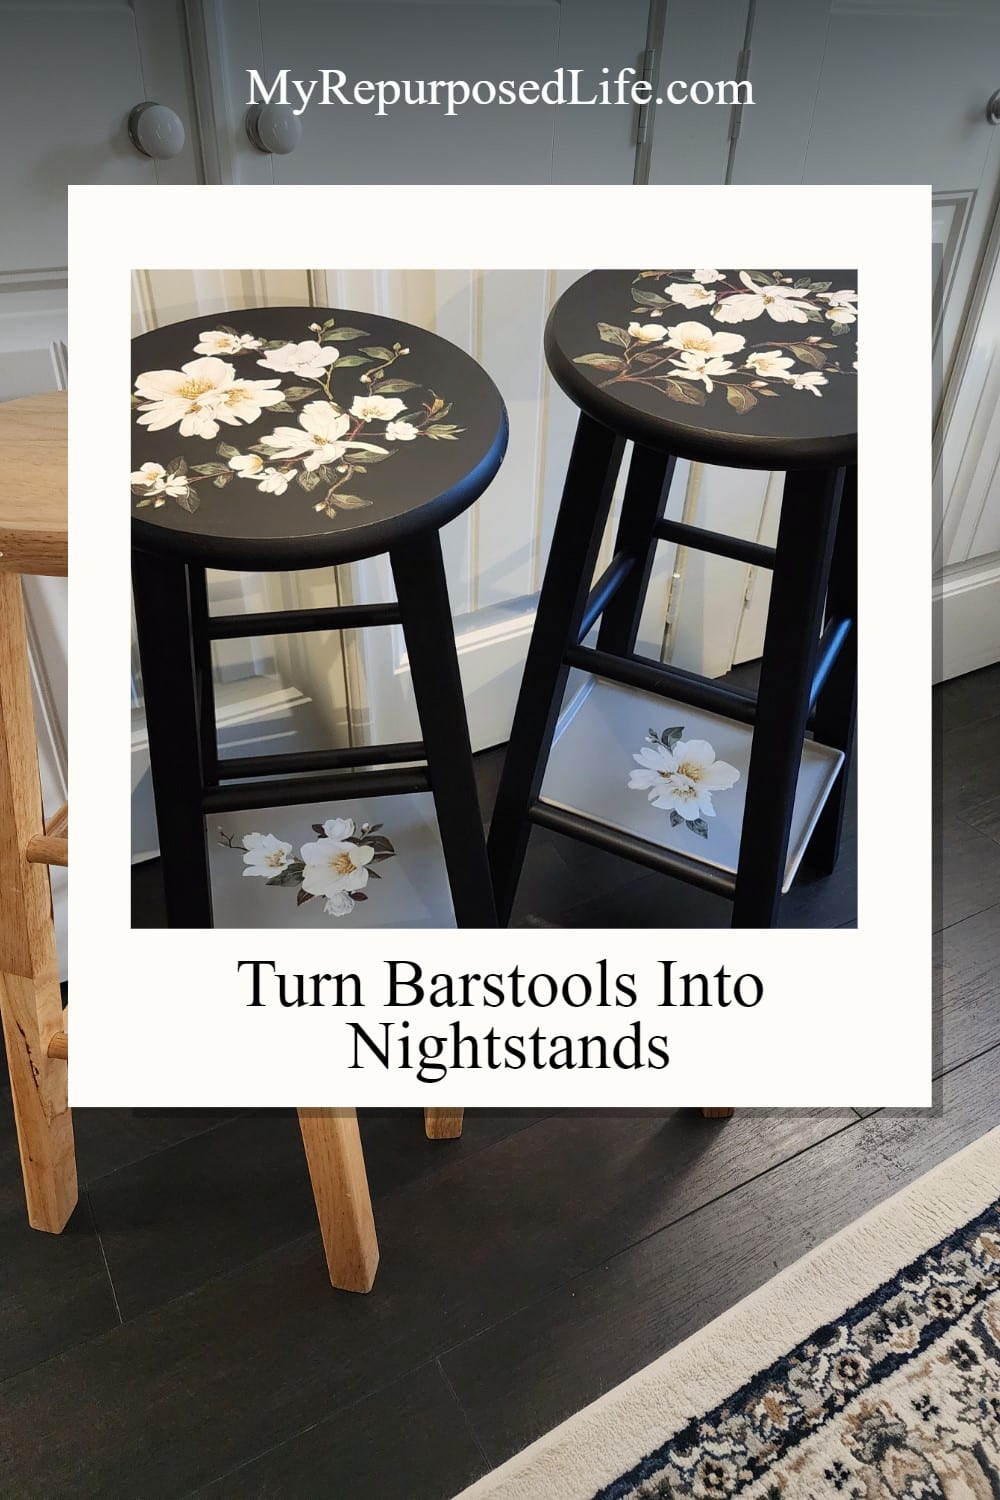 Create space for nightstands in a Queen-sized bed by upcycling bar stools. Learn how to transform bar stools into nightstands! via @repurposedlife